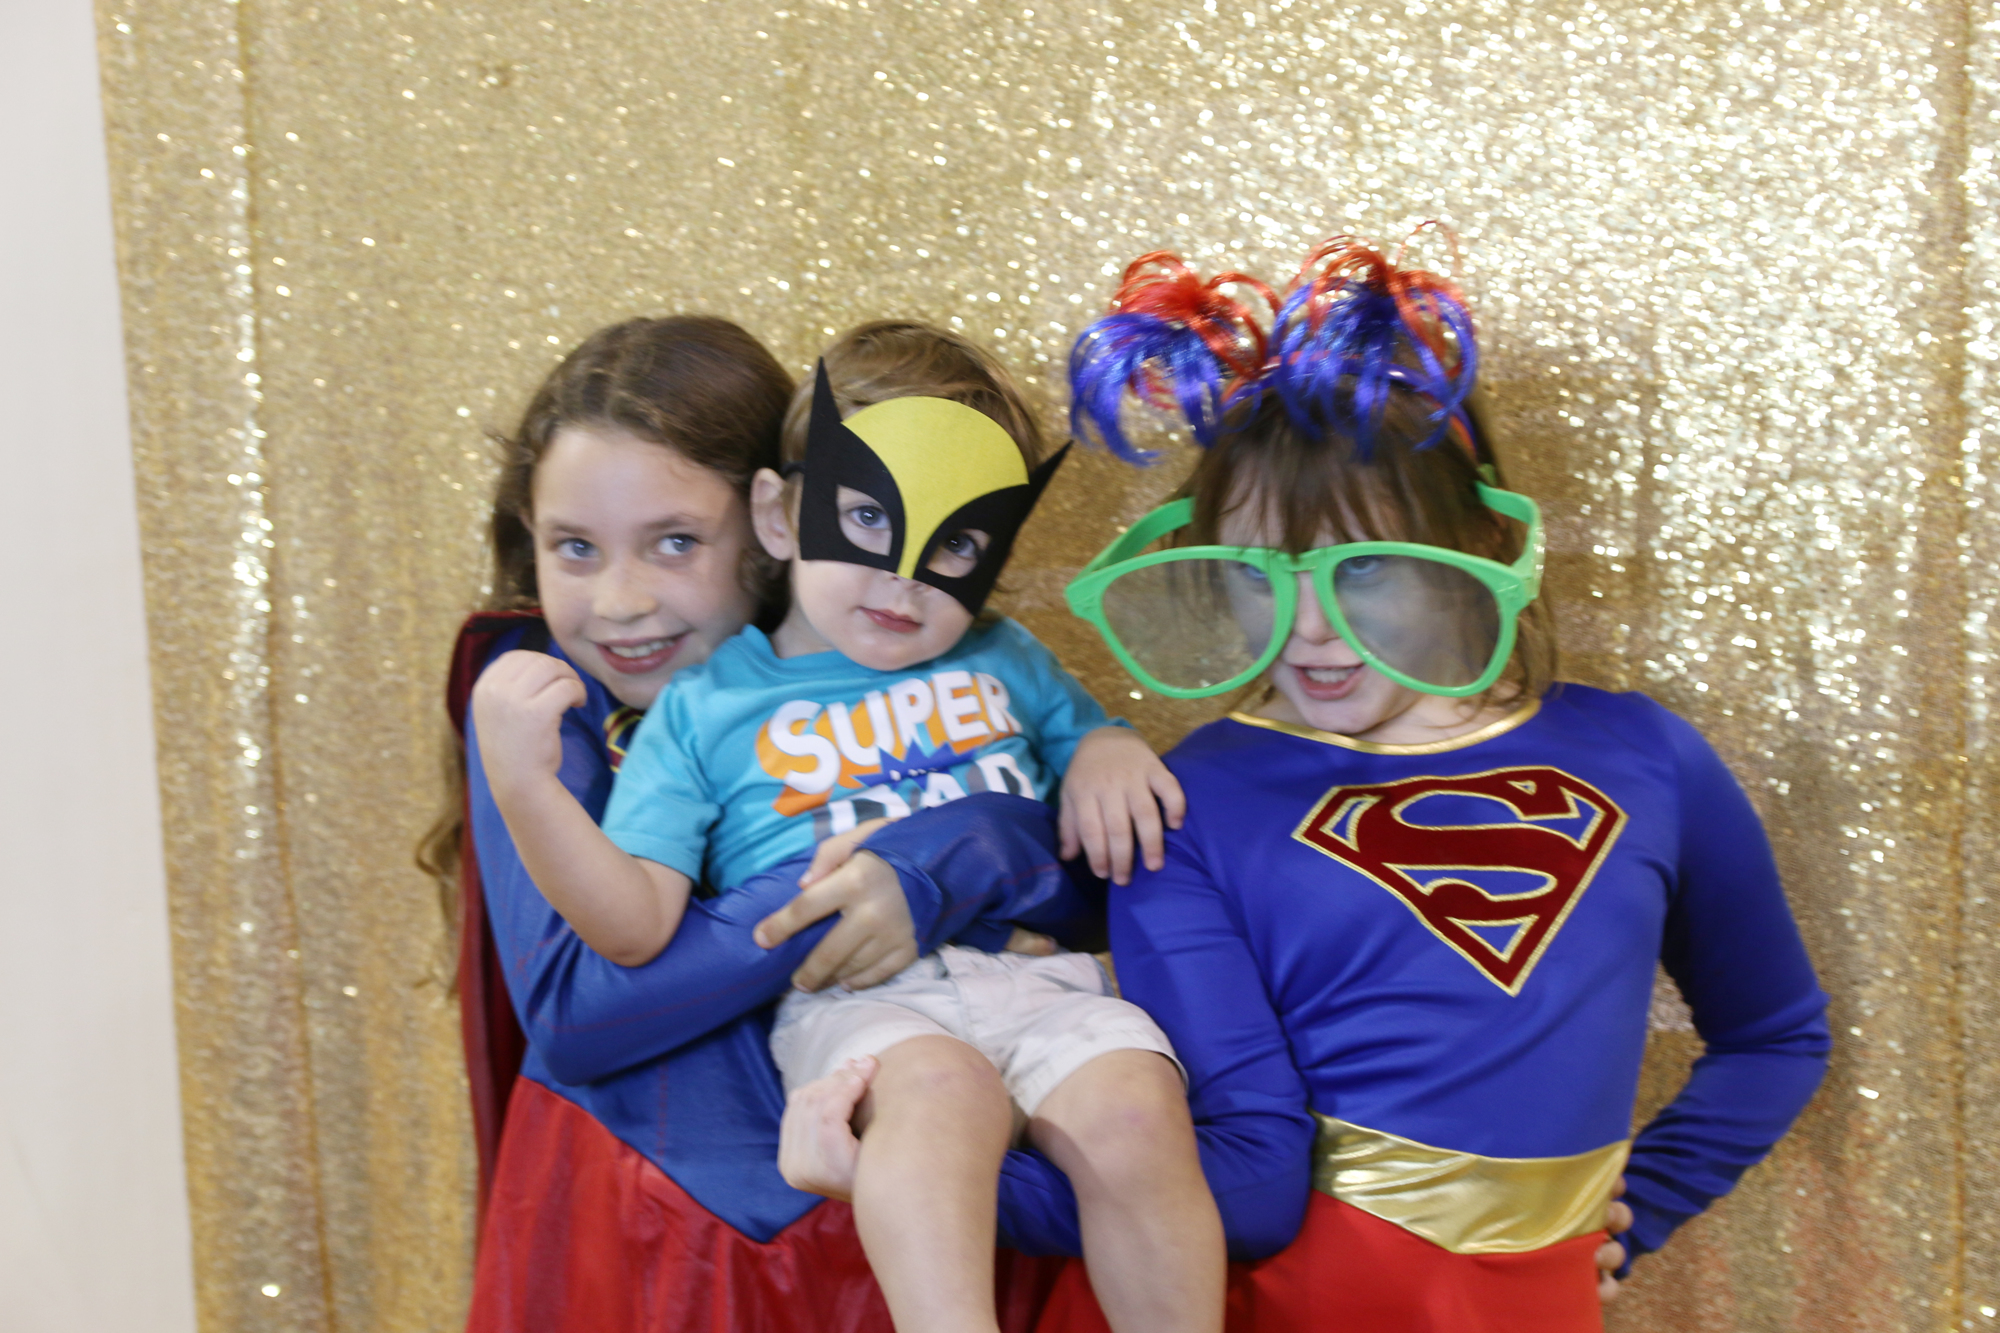 Caylyn Rutkowski, Jay Flaherty and Abby Flaherty take advantage of the photo booth during the annual National Night Out event on Tuesday, Aug. 6. Photo by Jarleene Almenas